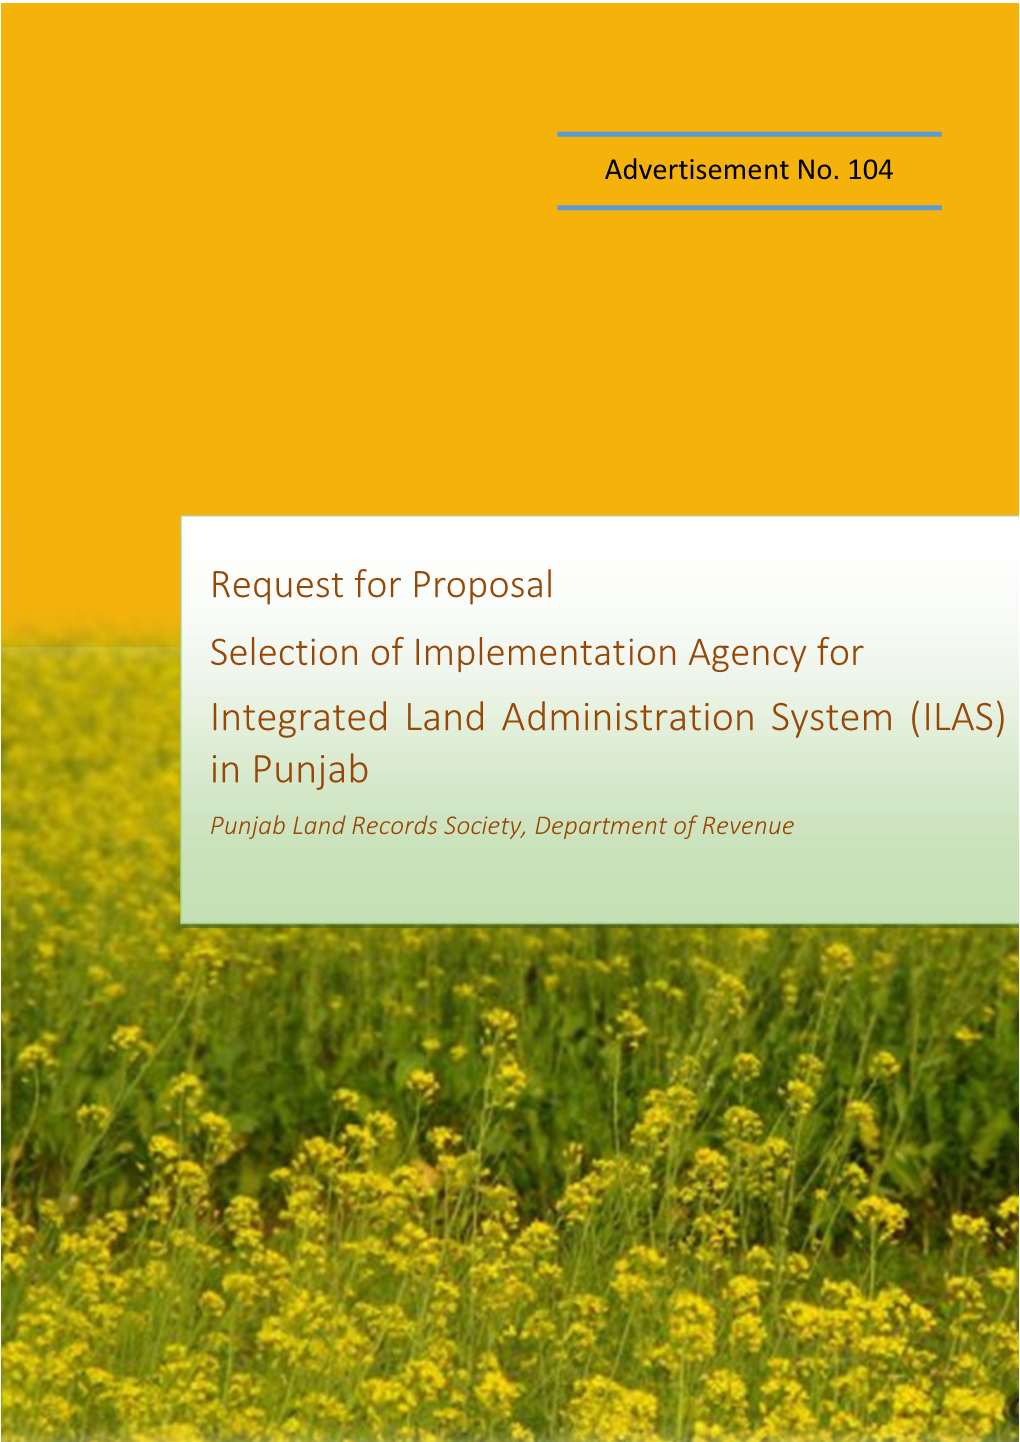 Integrated Land Administration System (ILAS) in Punjab